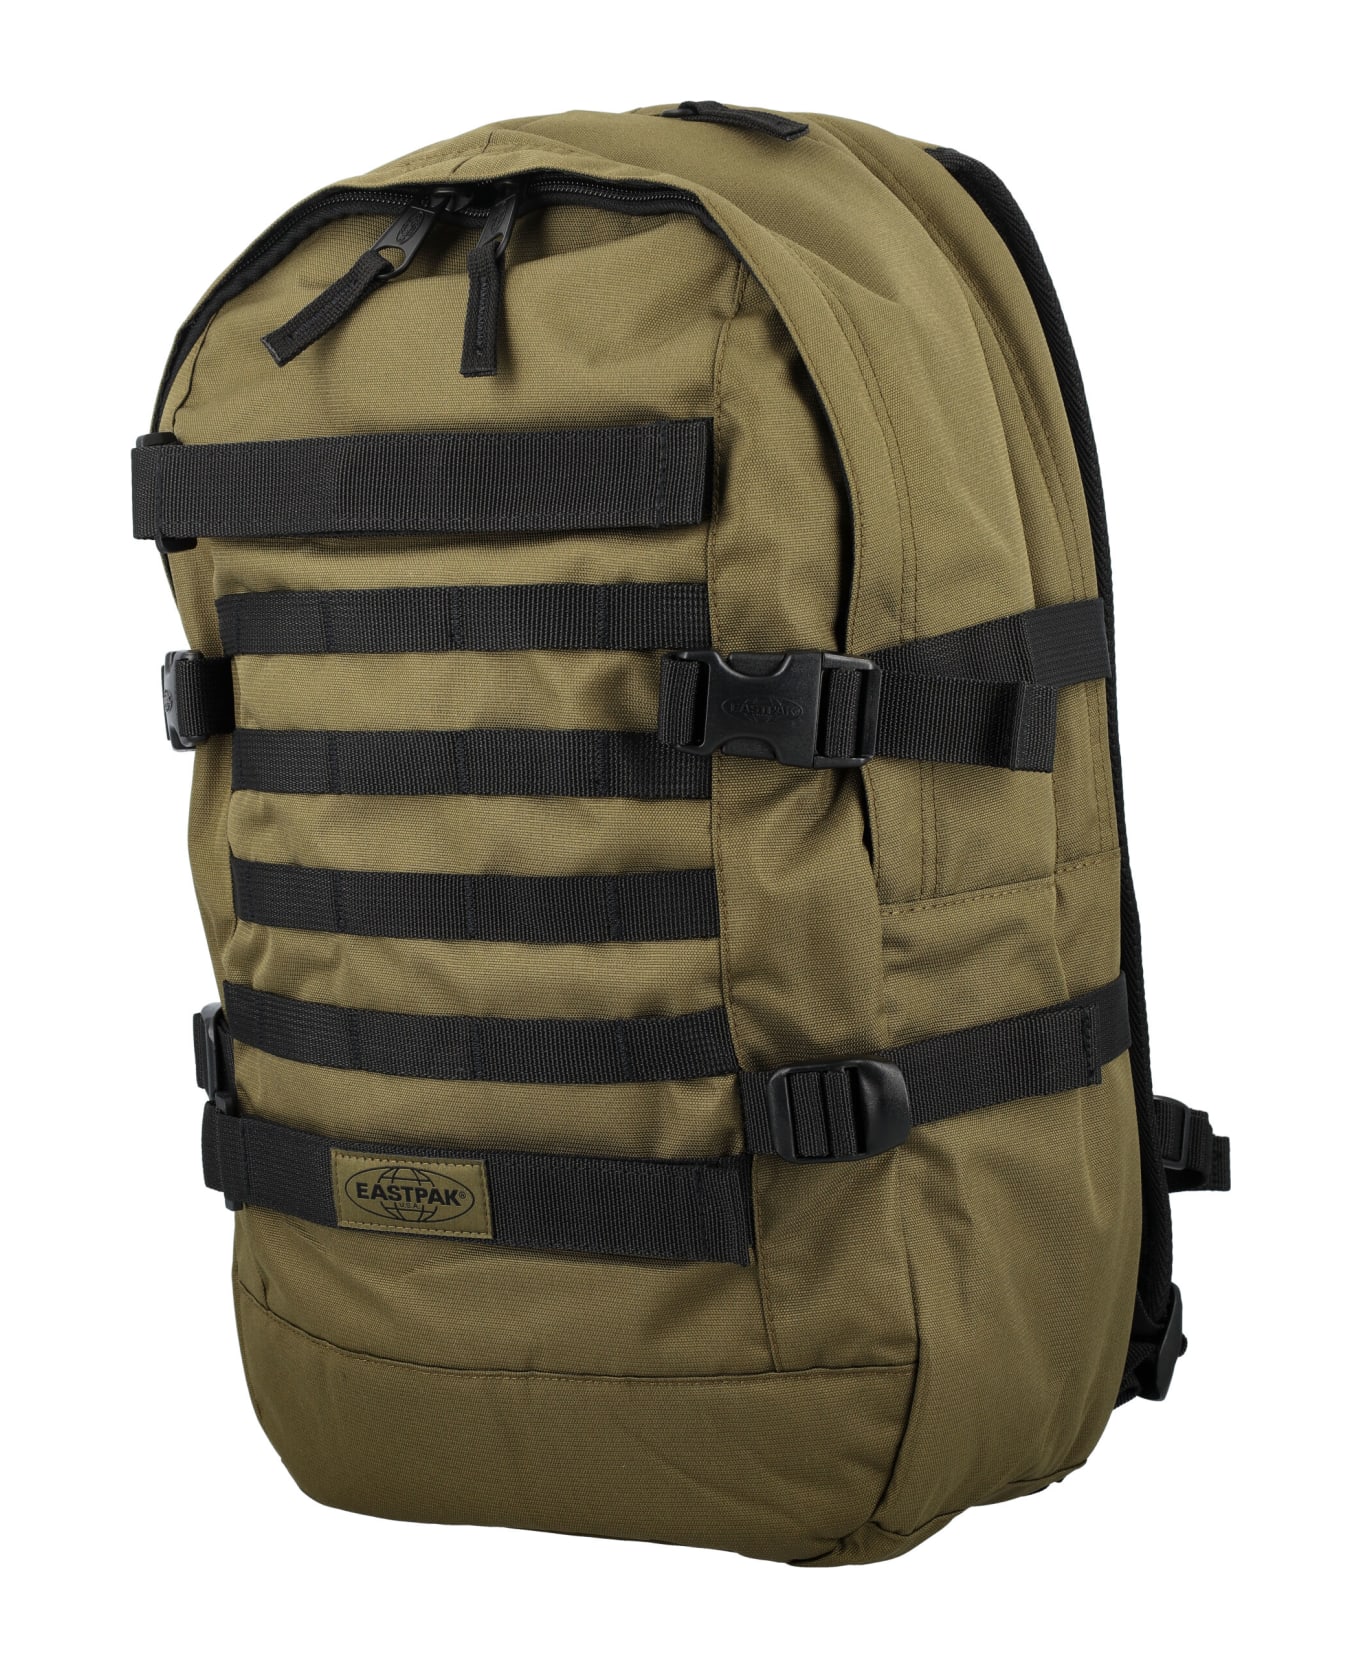 Eastpak Floid Tact Backpack - ARMY バックパック